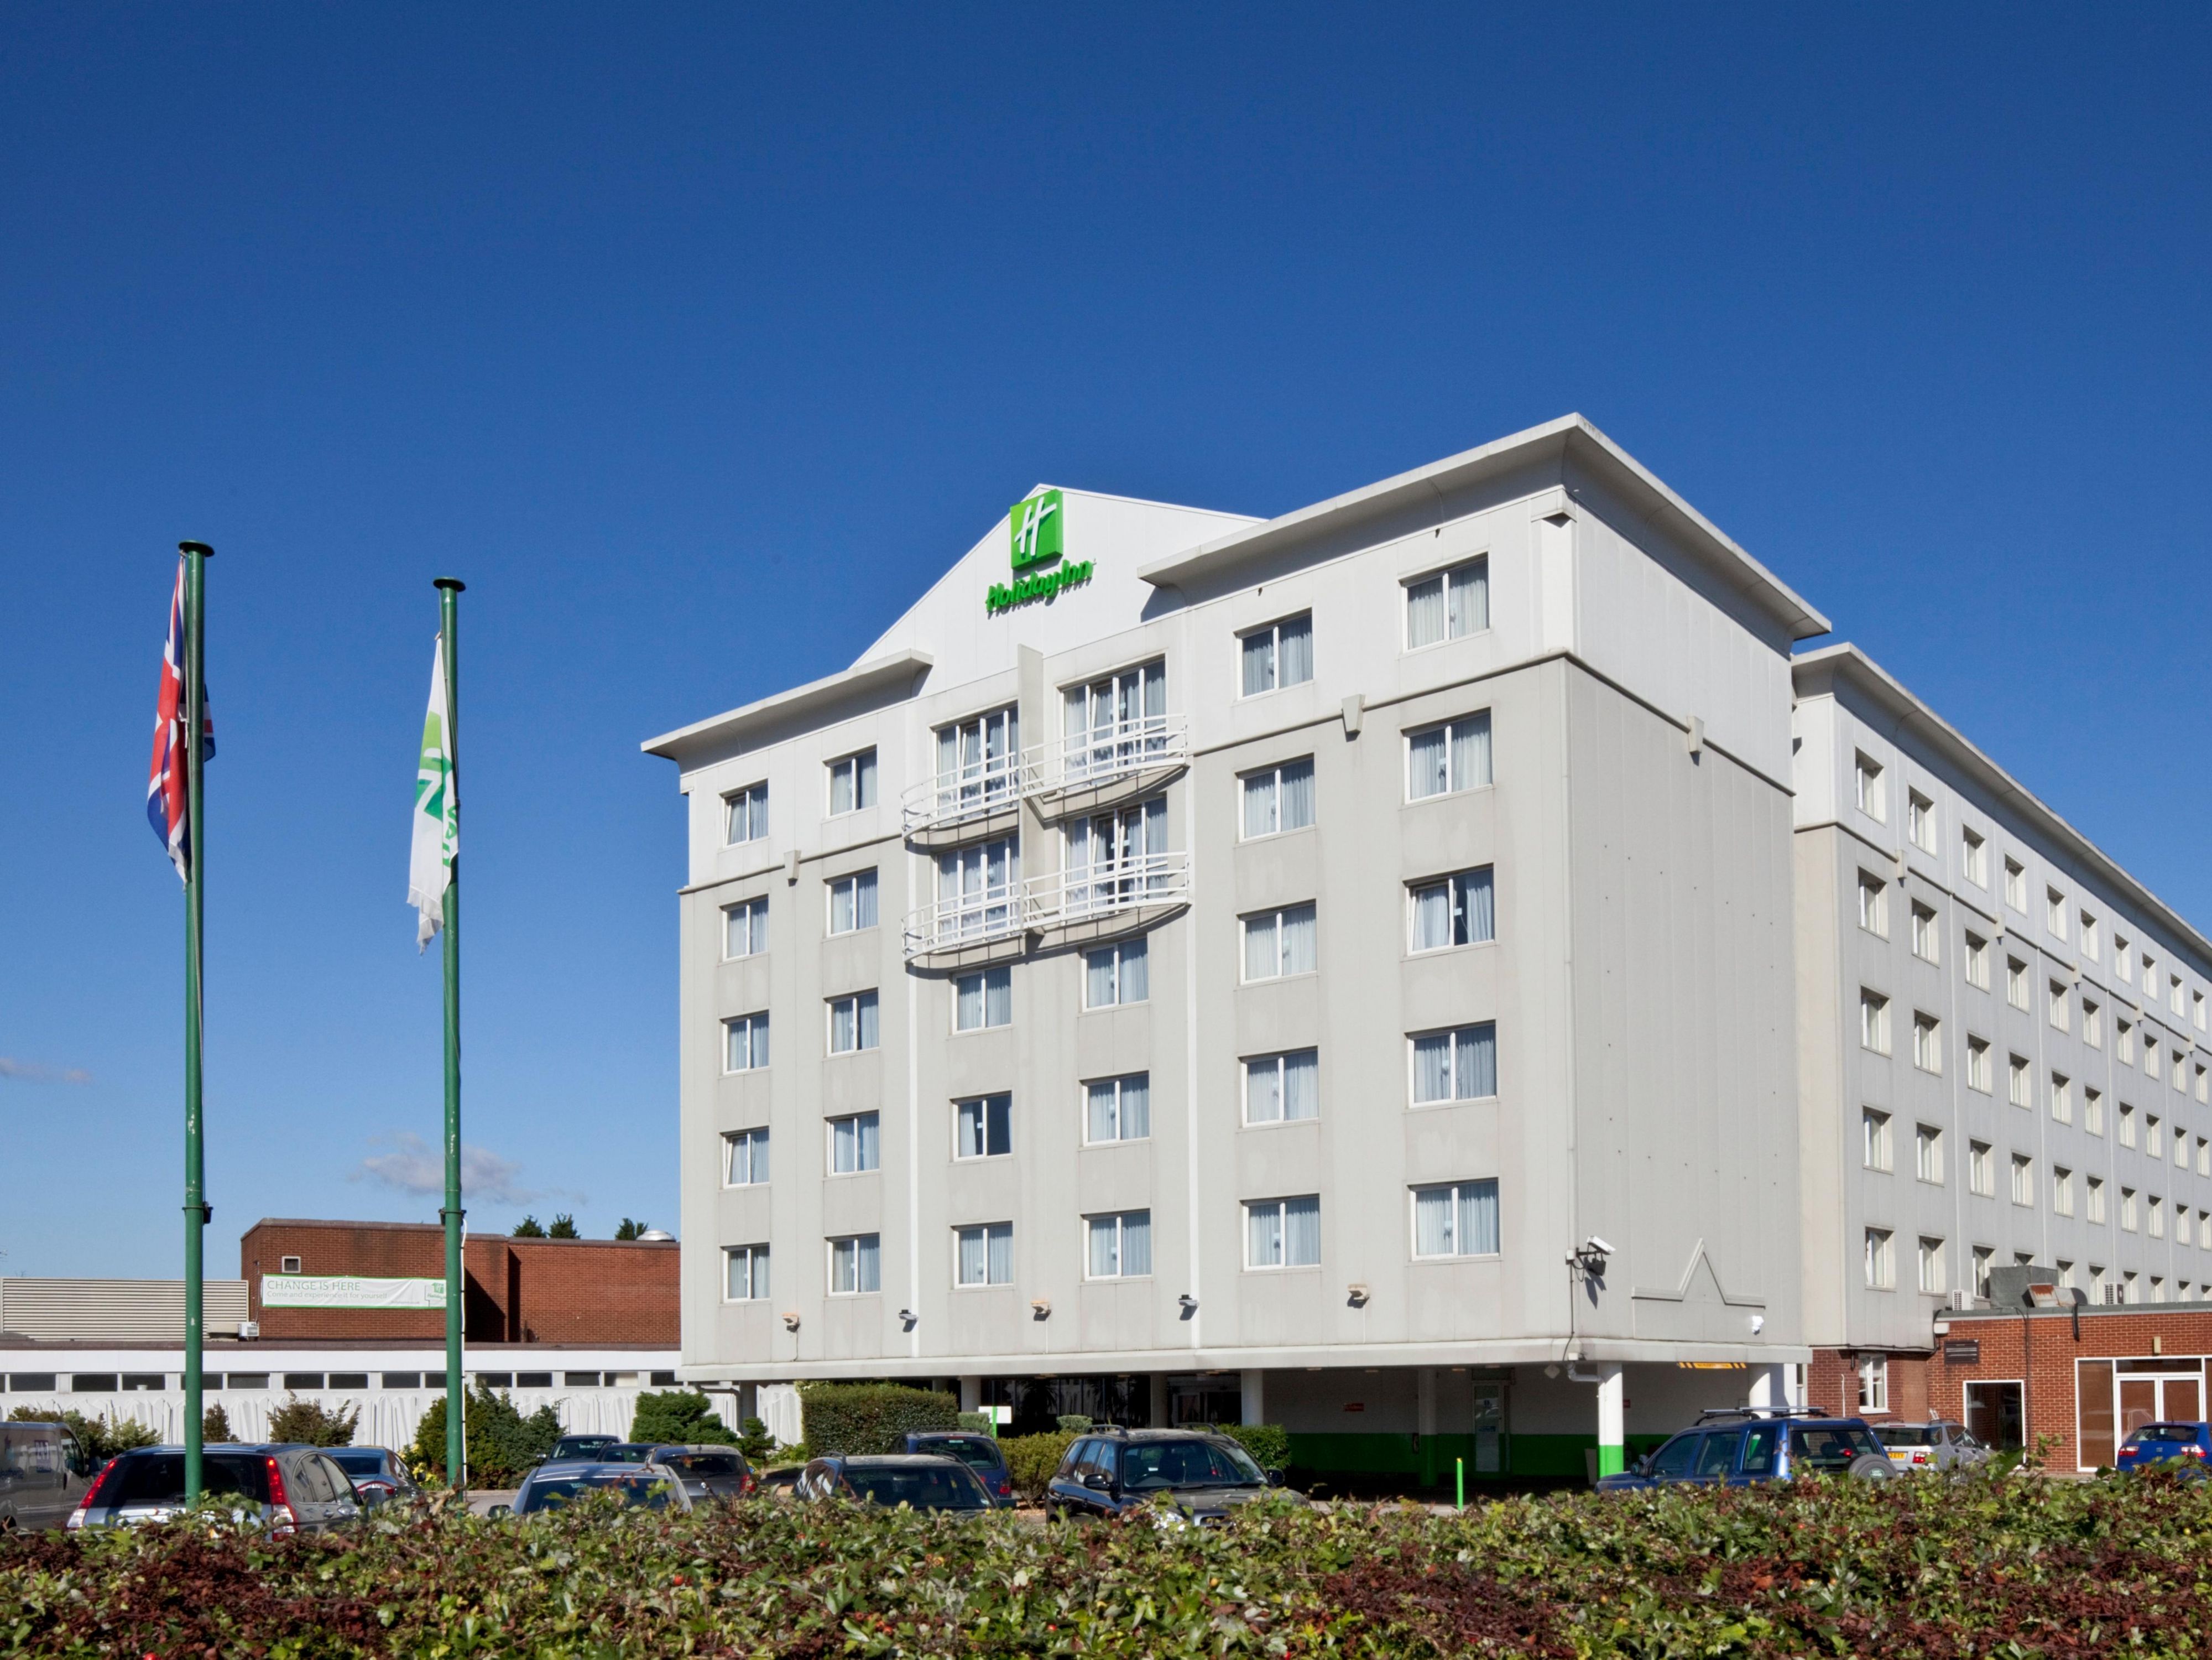 Located just 10 minutes' drive from the M25 and close to Basildon train station, the Holiday Inn is easily accessible and Central London is just a 35 minute direct train journey. The hotel is located within the Festival Leisure Park, which offers a host of dining and entertainment options. 